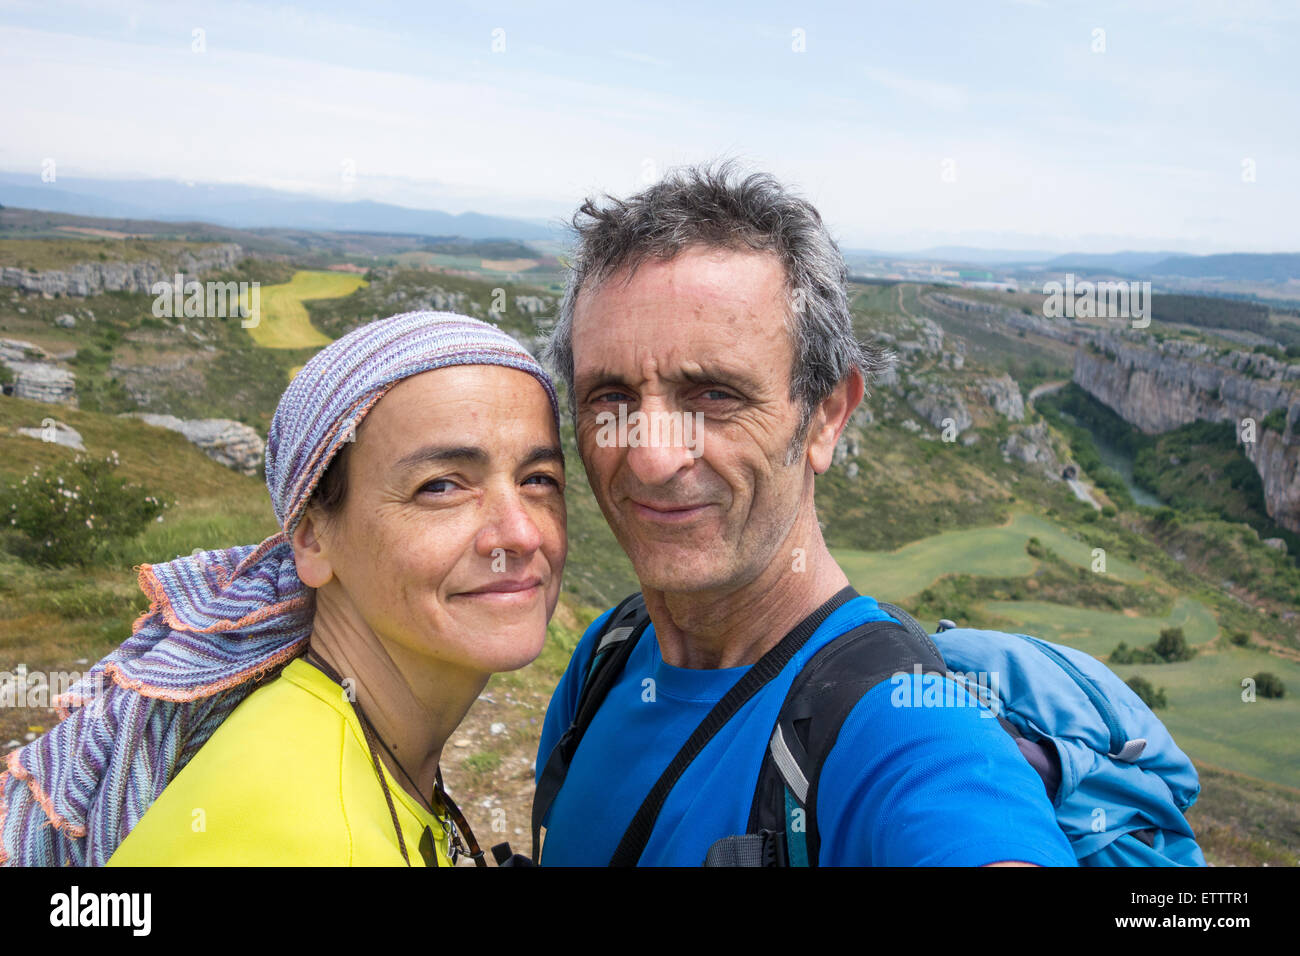 Mature backpacking couple taking selfie. Stock Photo